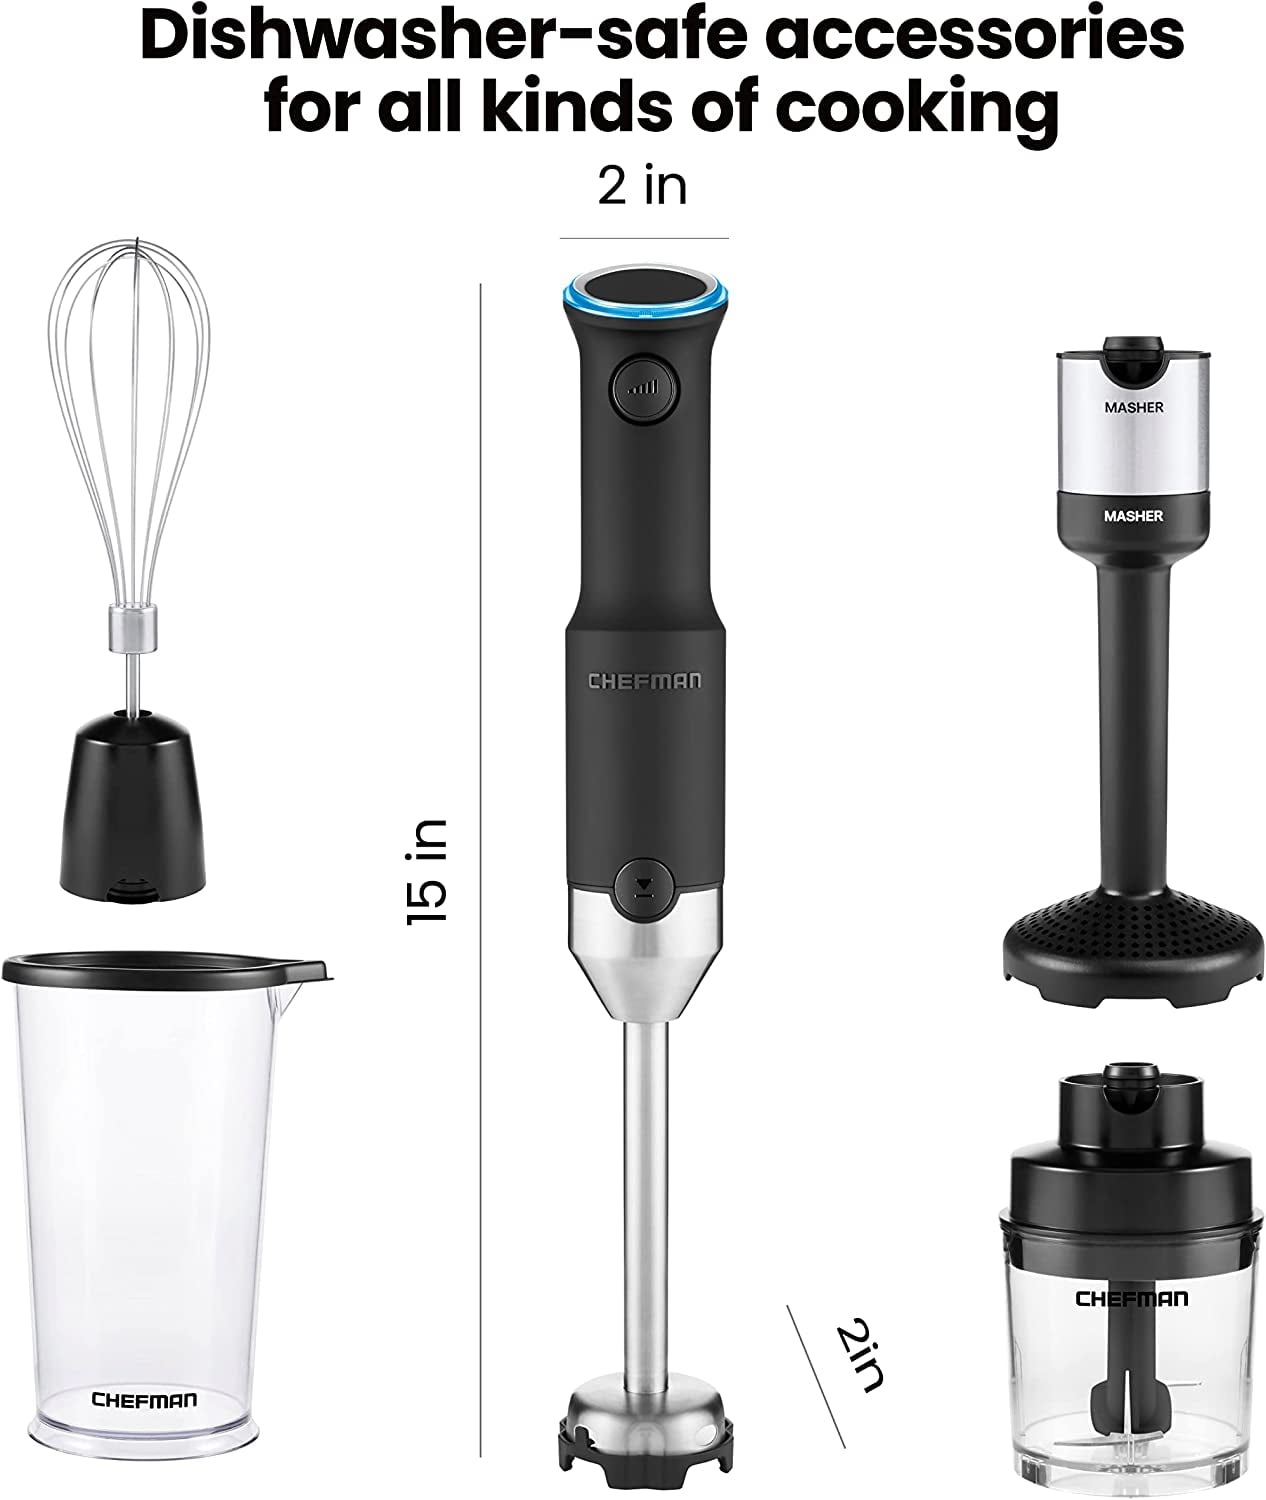 Immersion blender attachment for cordless drill/driver? - Reviews -  ToolGuyd Community Forum